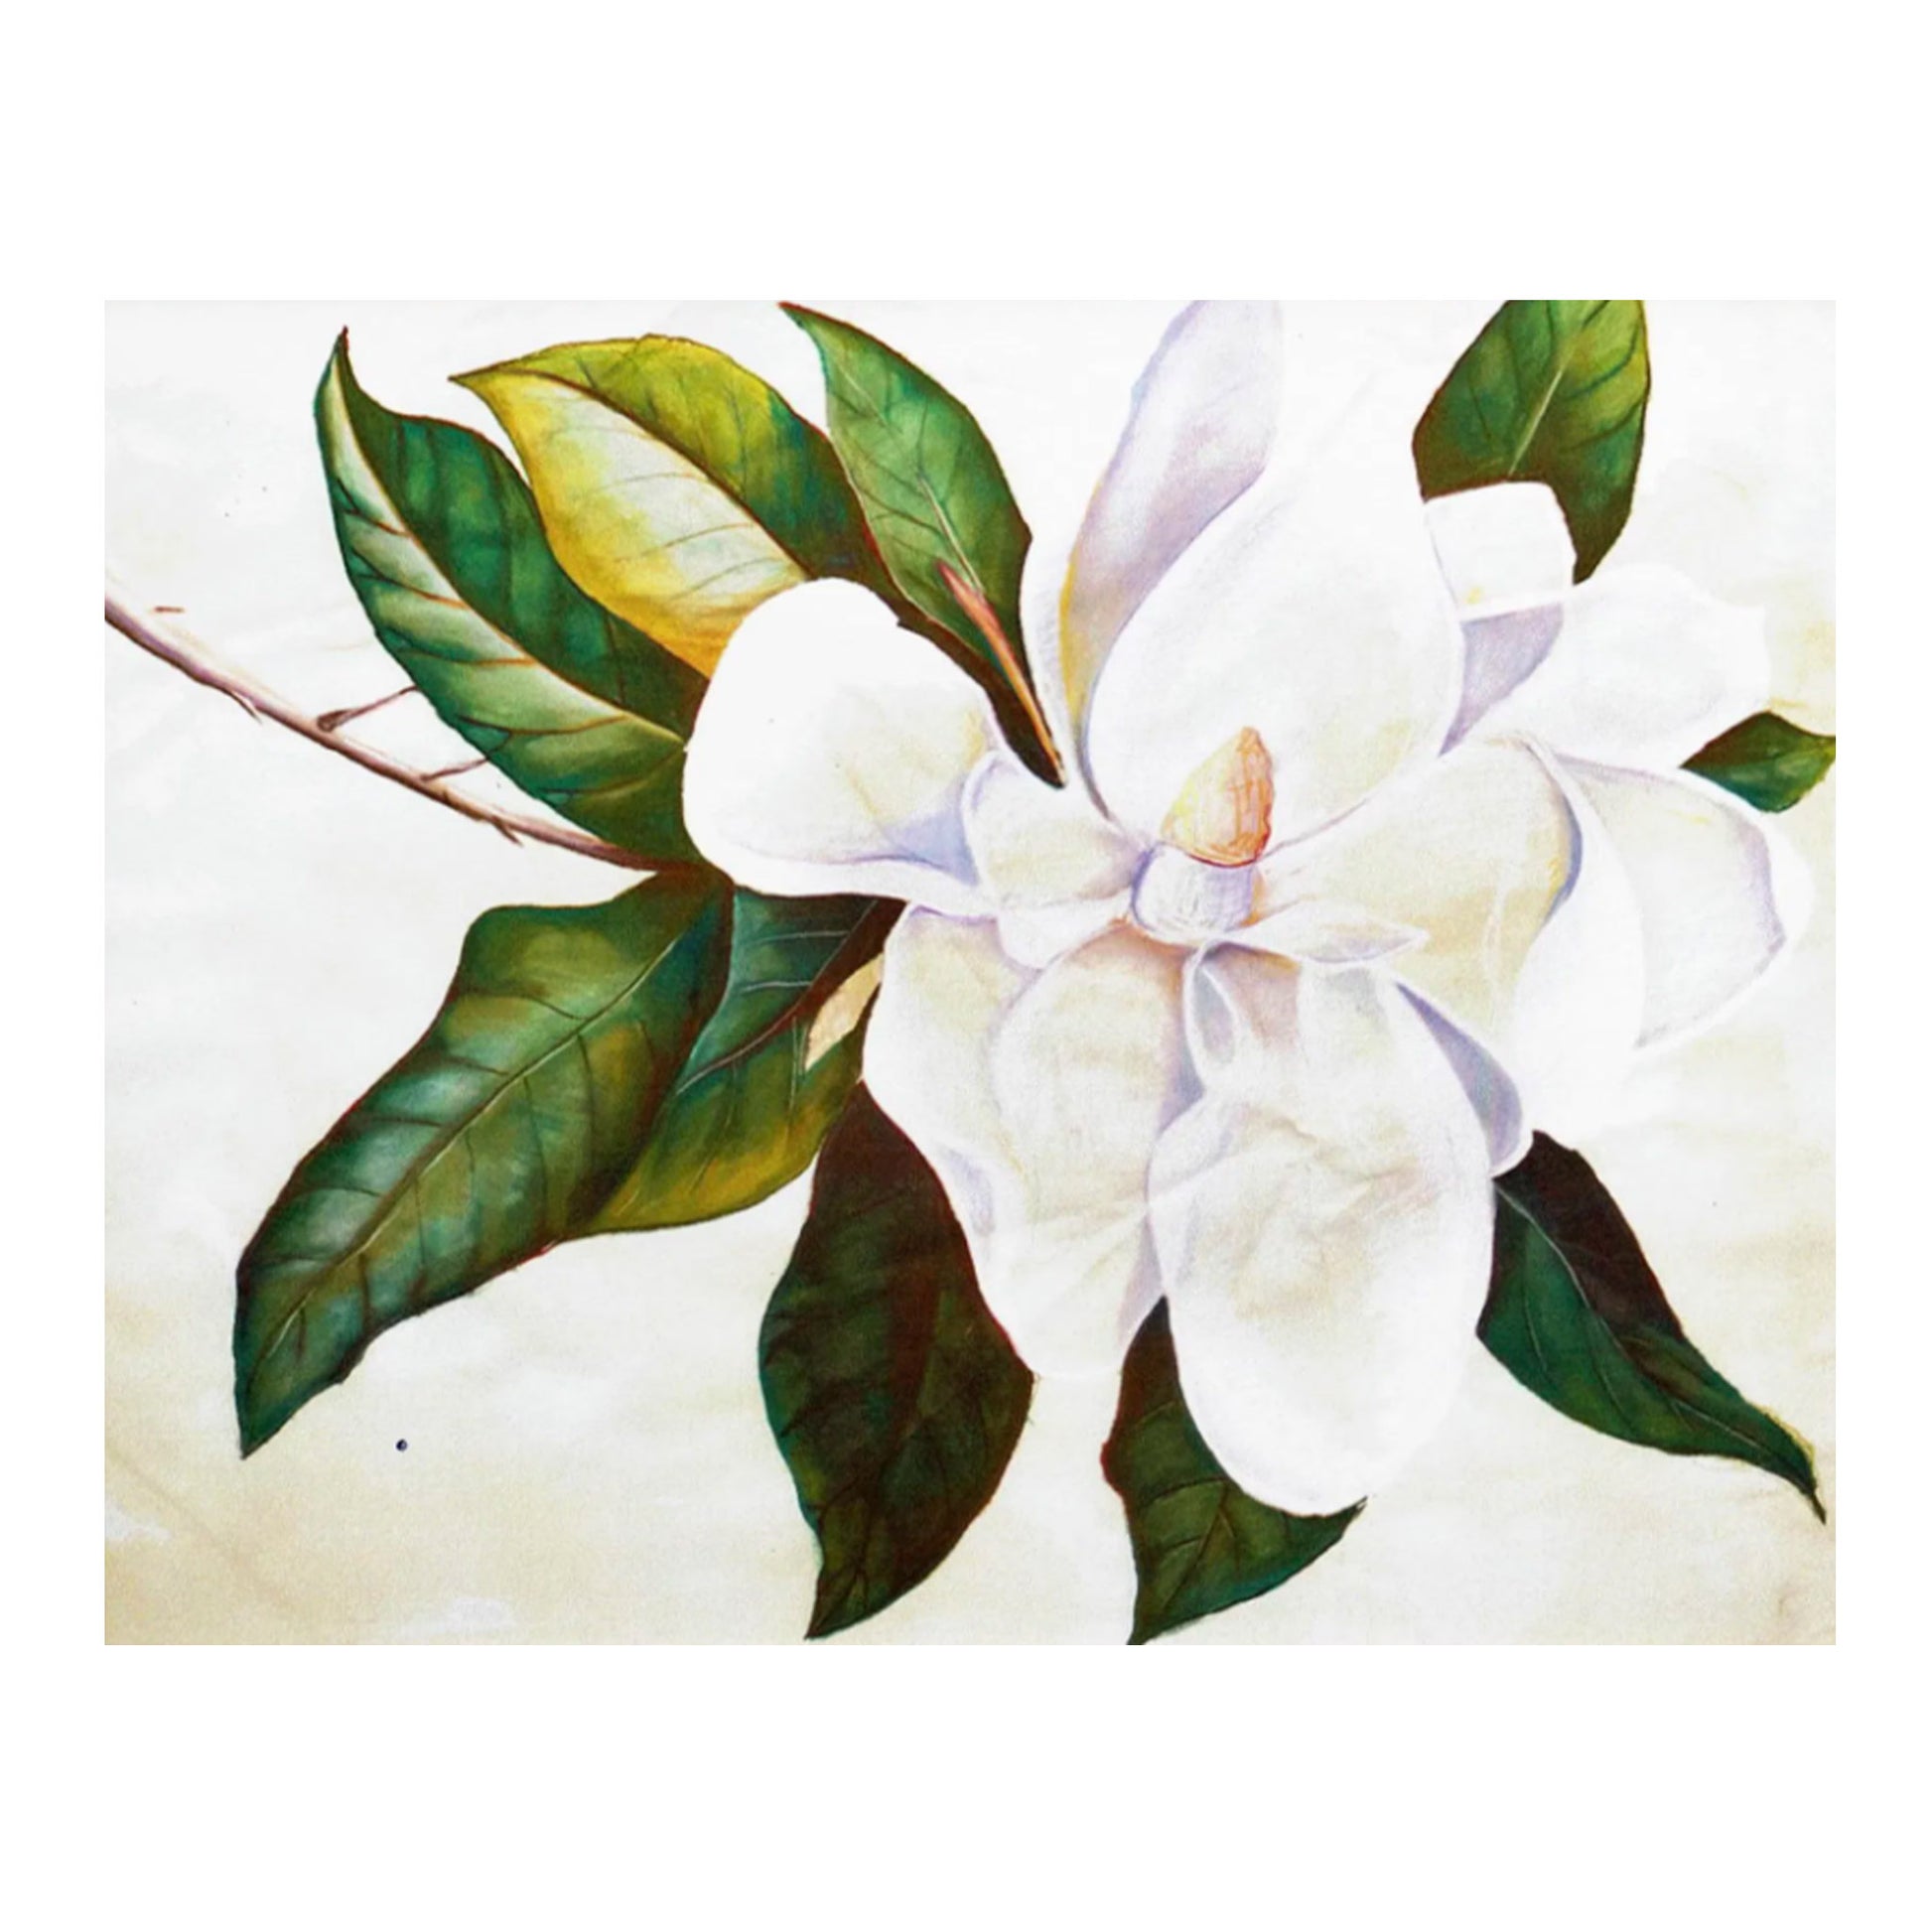 Not Just Another Magnolia Canvas Print